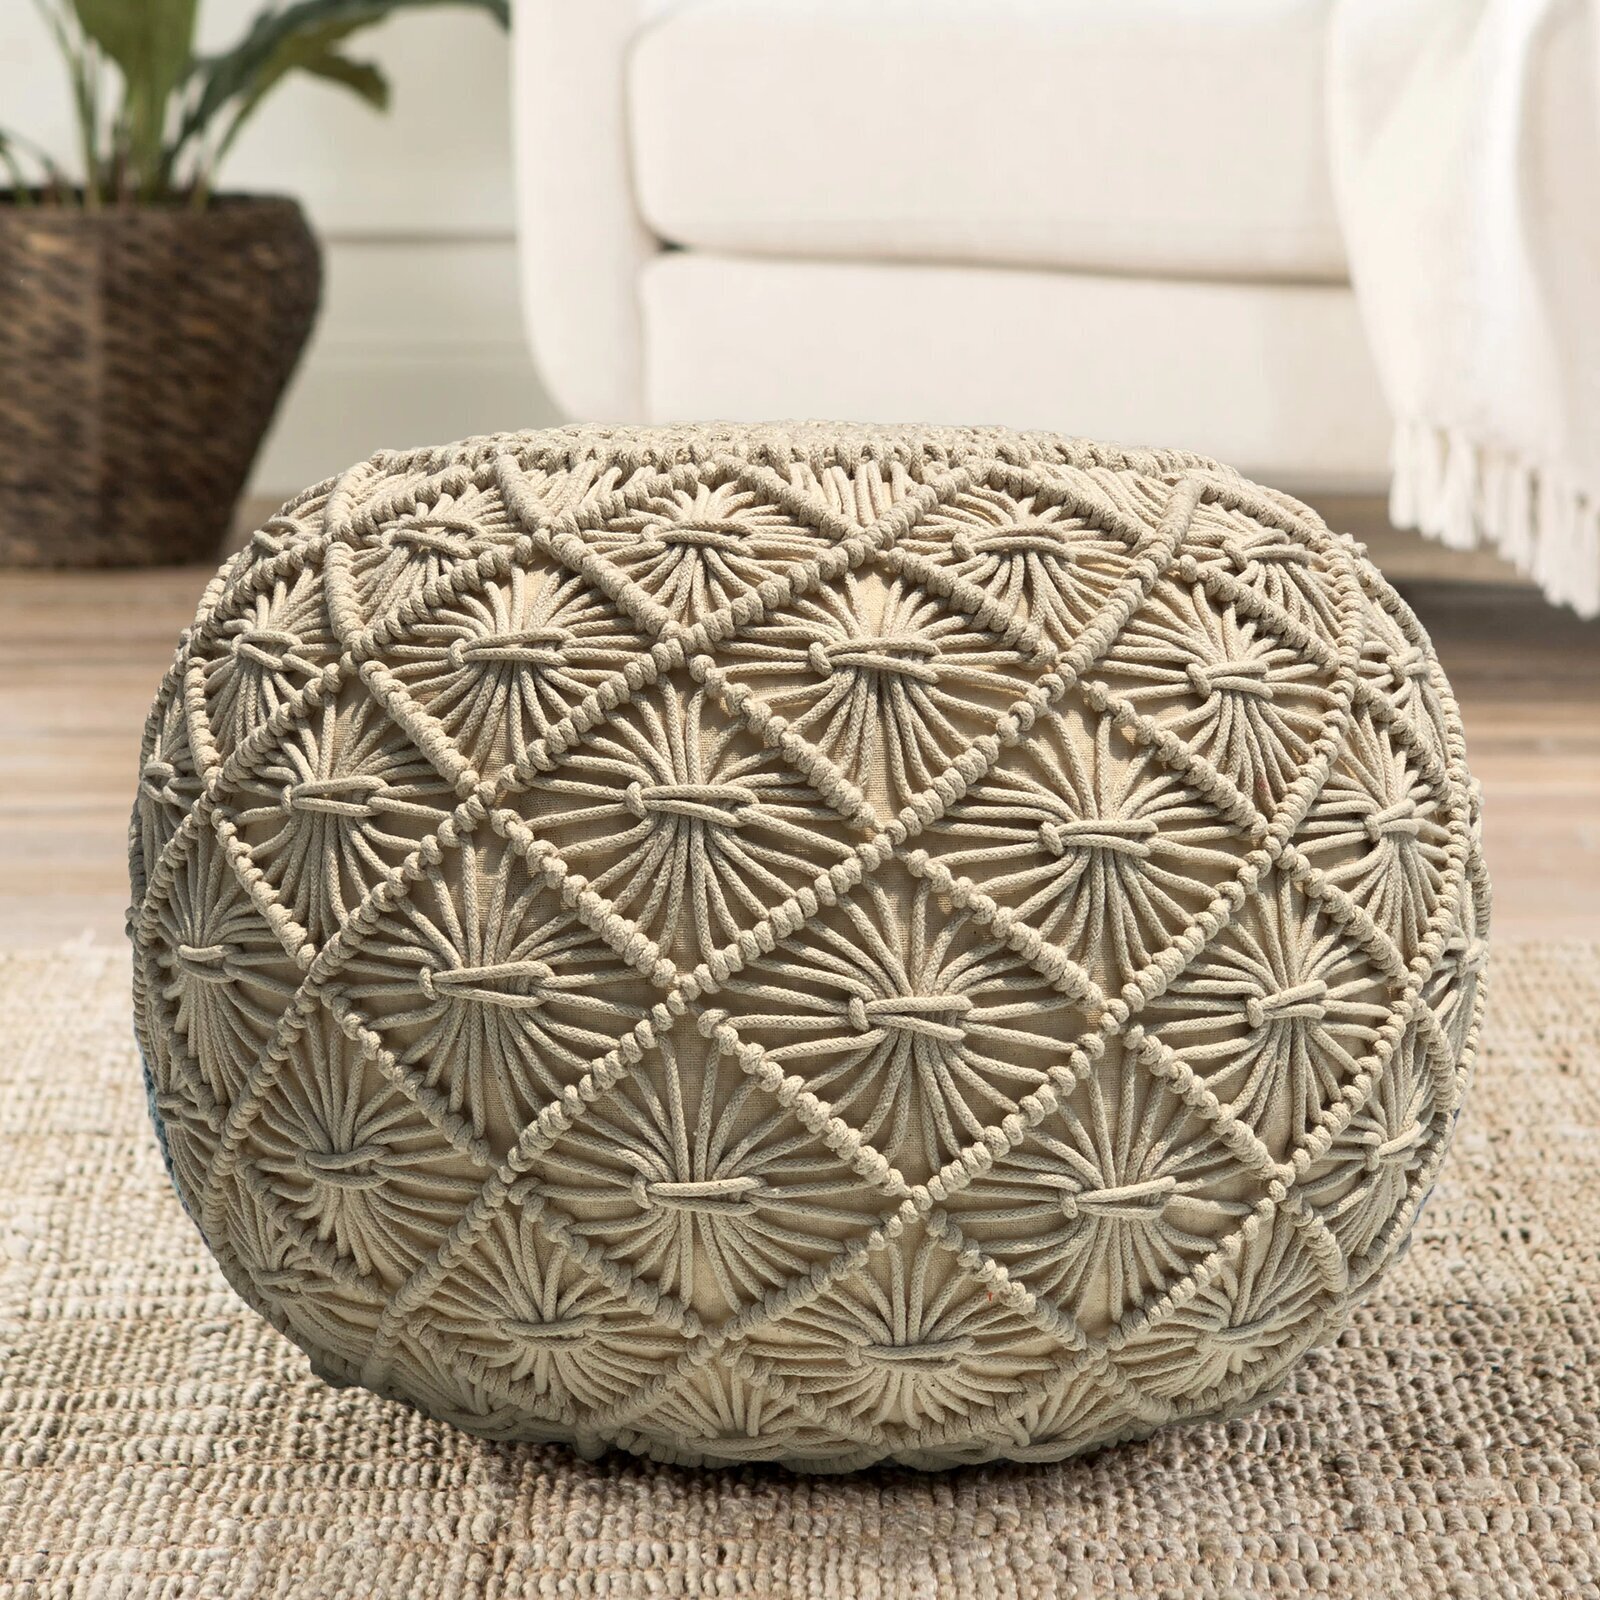 Hand Knitted Patterned Pouf